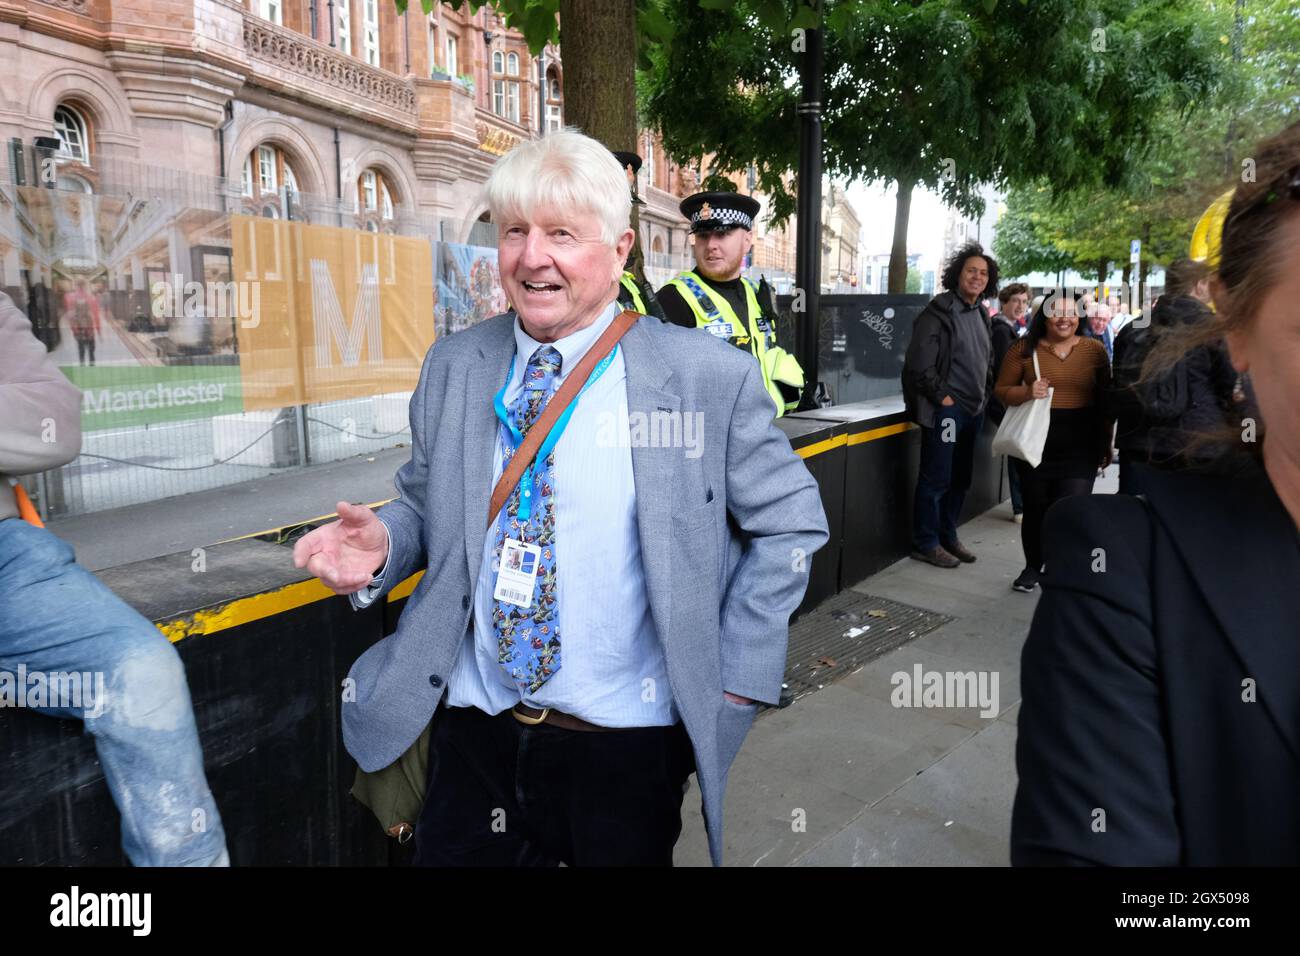 Manchester, UK – Monday 4th October 2021 – Stanley Johnson the father of Boris Johnson seen outside the Conservative Party Conference in Manchester. Photo Steven May / Alamy Live News Stock Photo